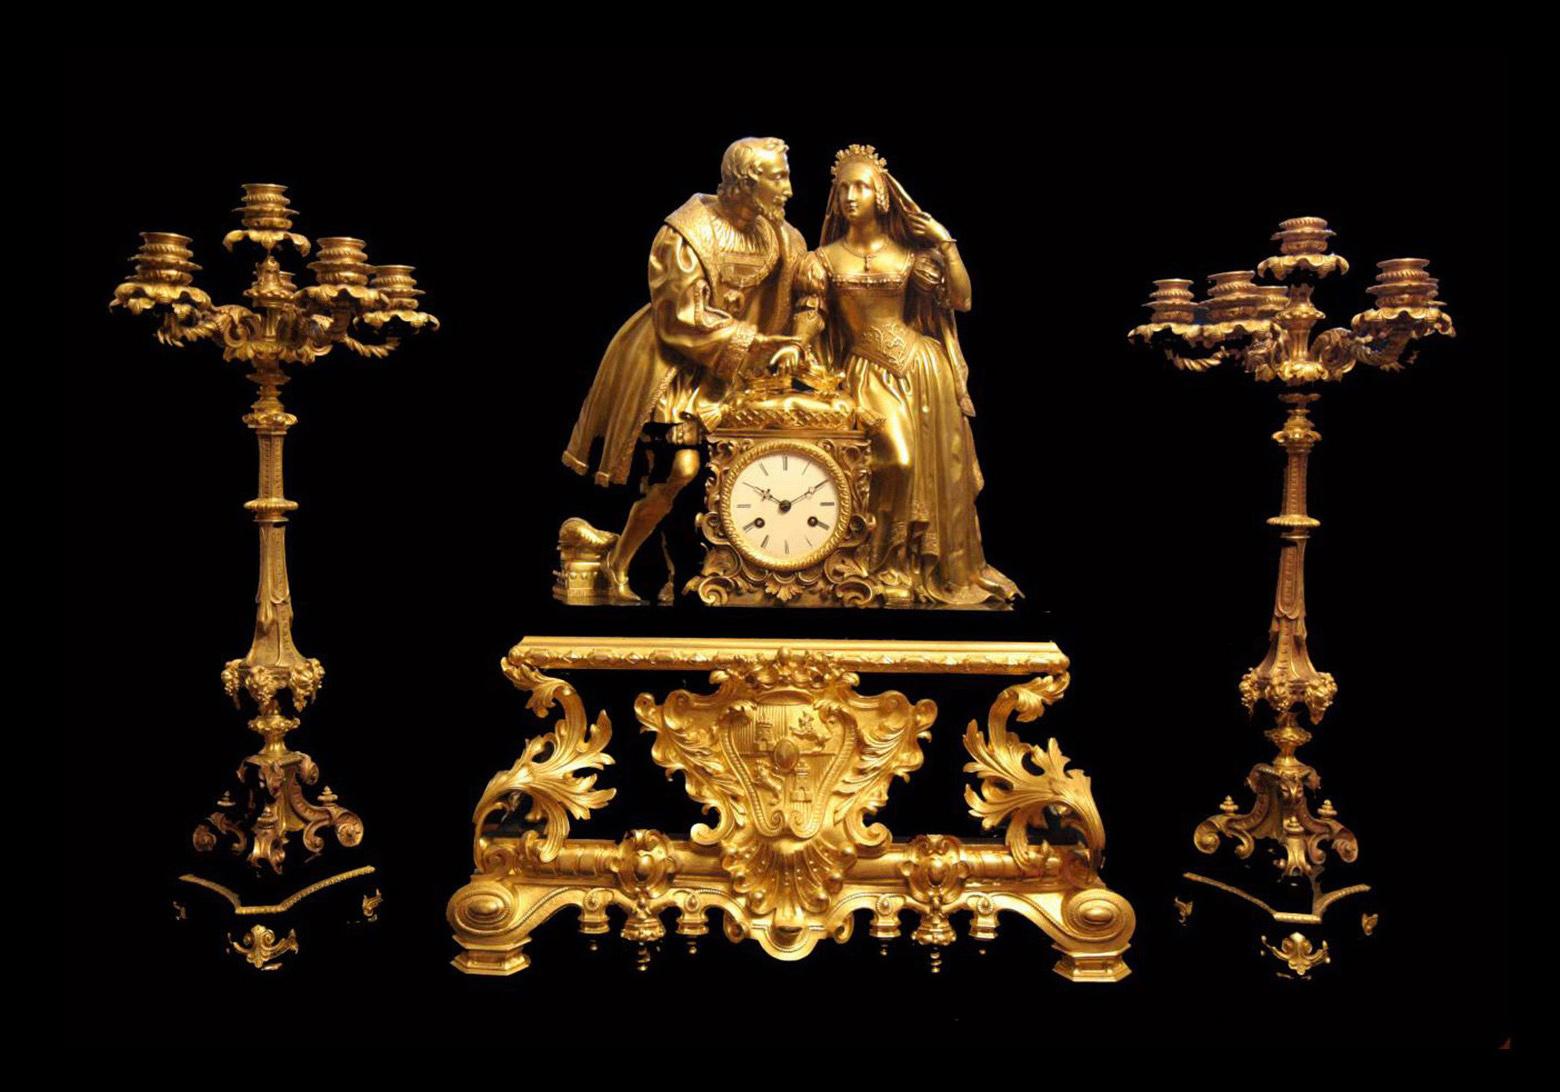 Direct from a Private Chateau Outside of Paris, a Magnificent Gold Plated Bronze and Black Marble Mantel Clock and Accompanying Candelabra Commemorating the Marriage of Charles V of France and Joanna de Bourbon, circa 1840s. Charles V, called the